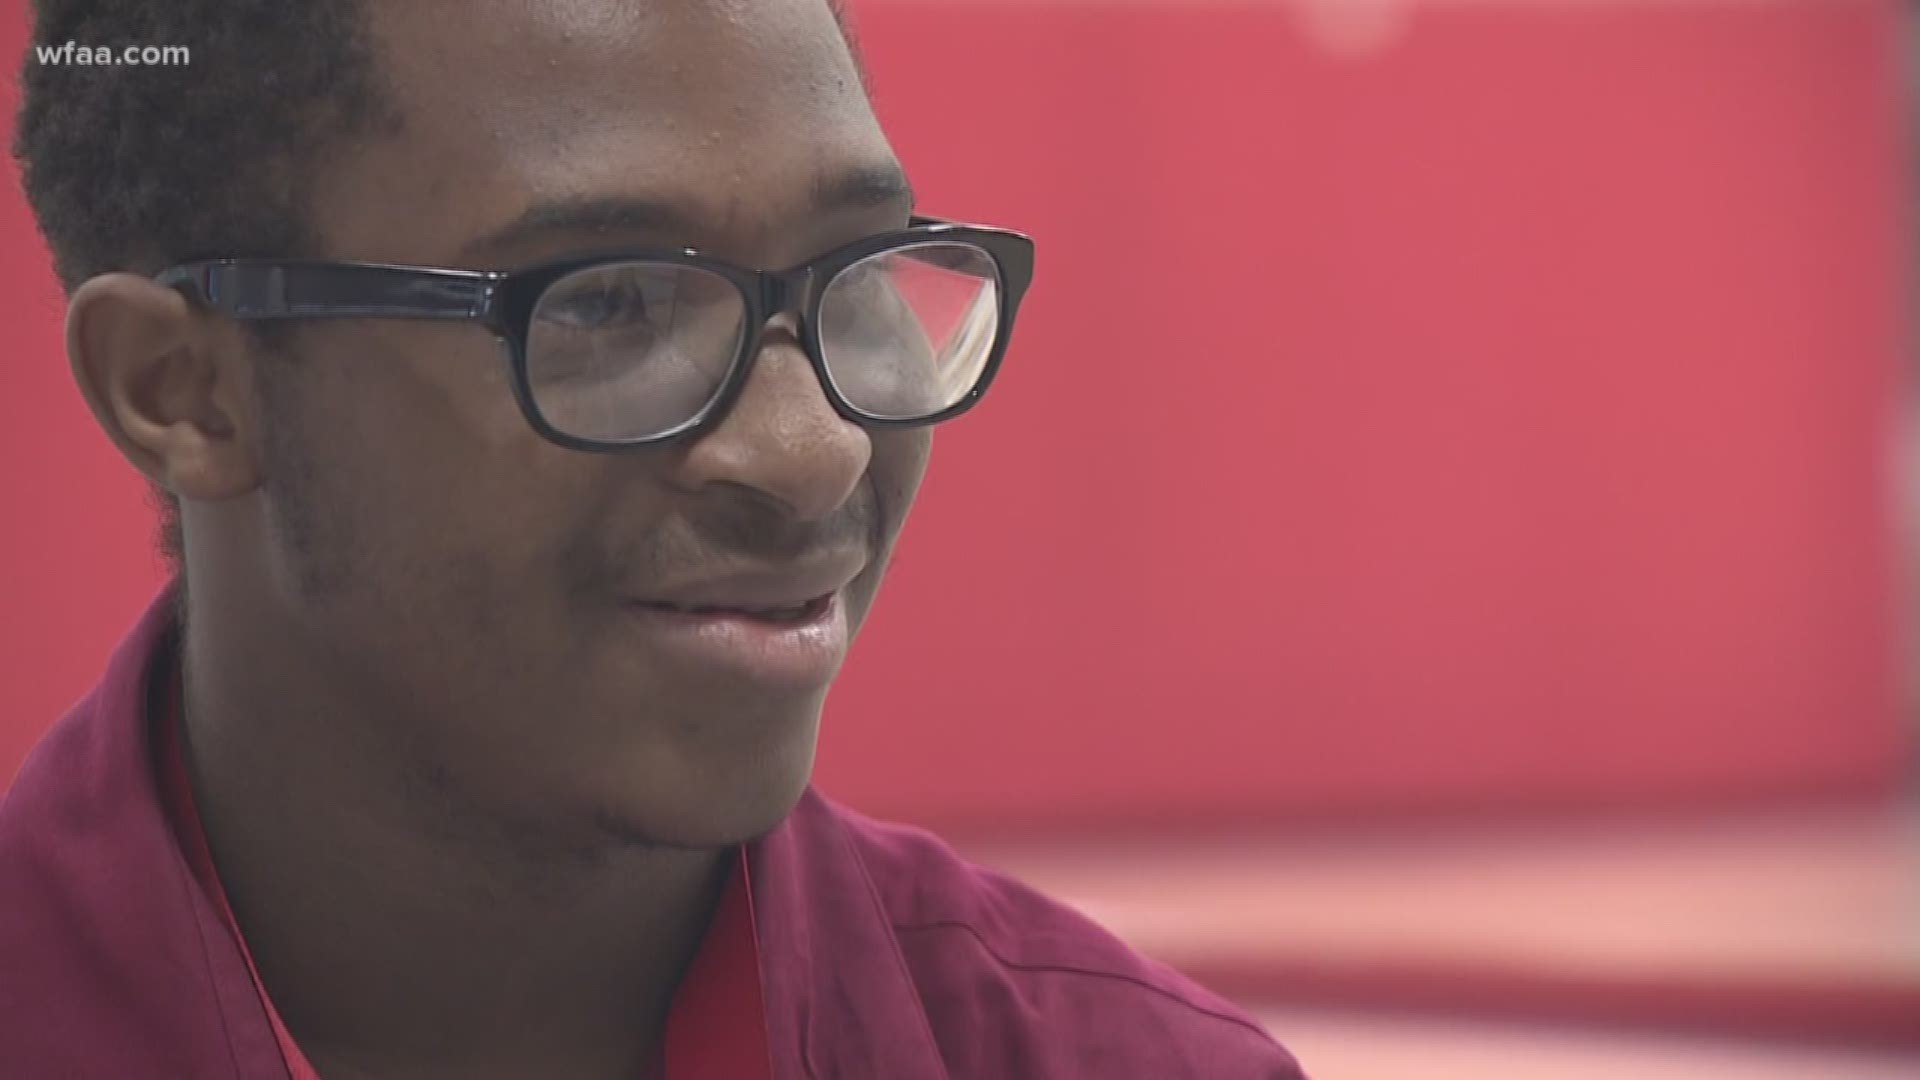 Isaiah enjoys playing basketball and volleyball and won a Special Olympics gold medal.